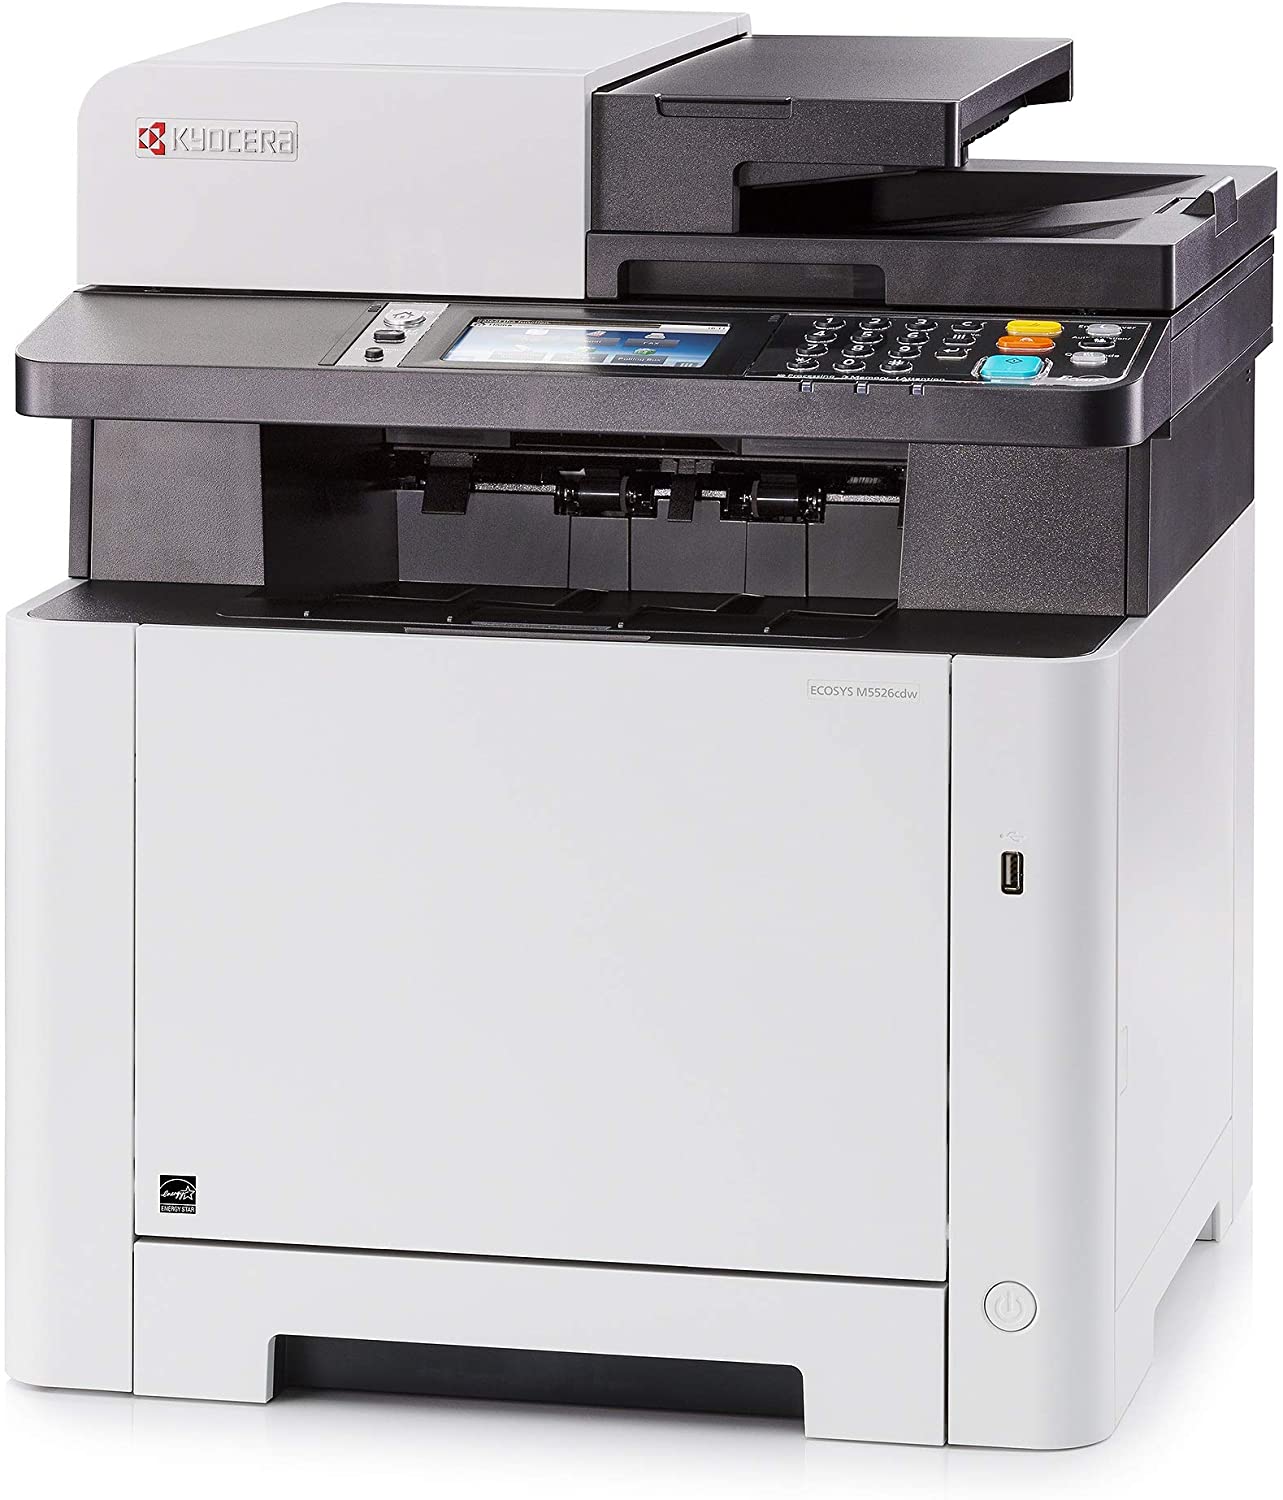 Absolute Toner $42.74/Month Kyocera ECOSYS M5526cdw A4 Color Laser Printer, Copier Scanner For Office Use Showroom Color Copiers